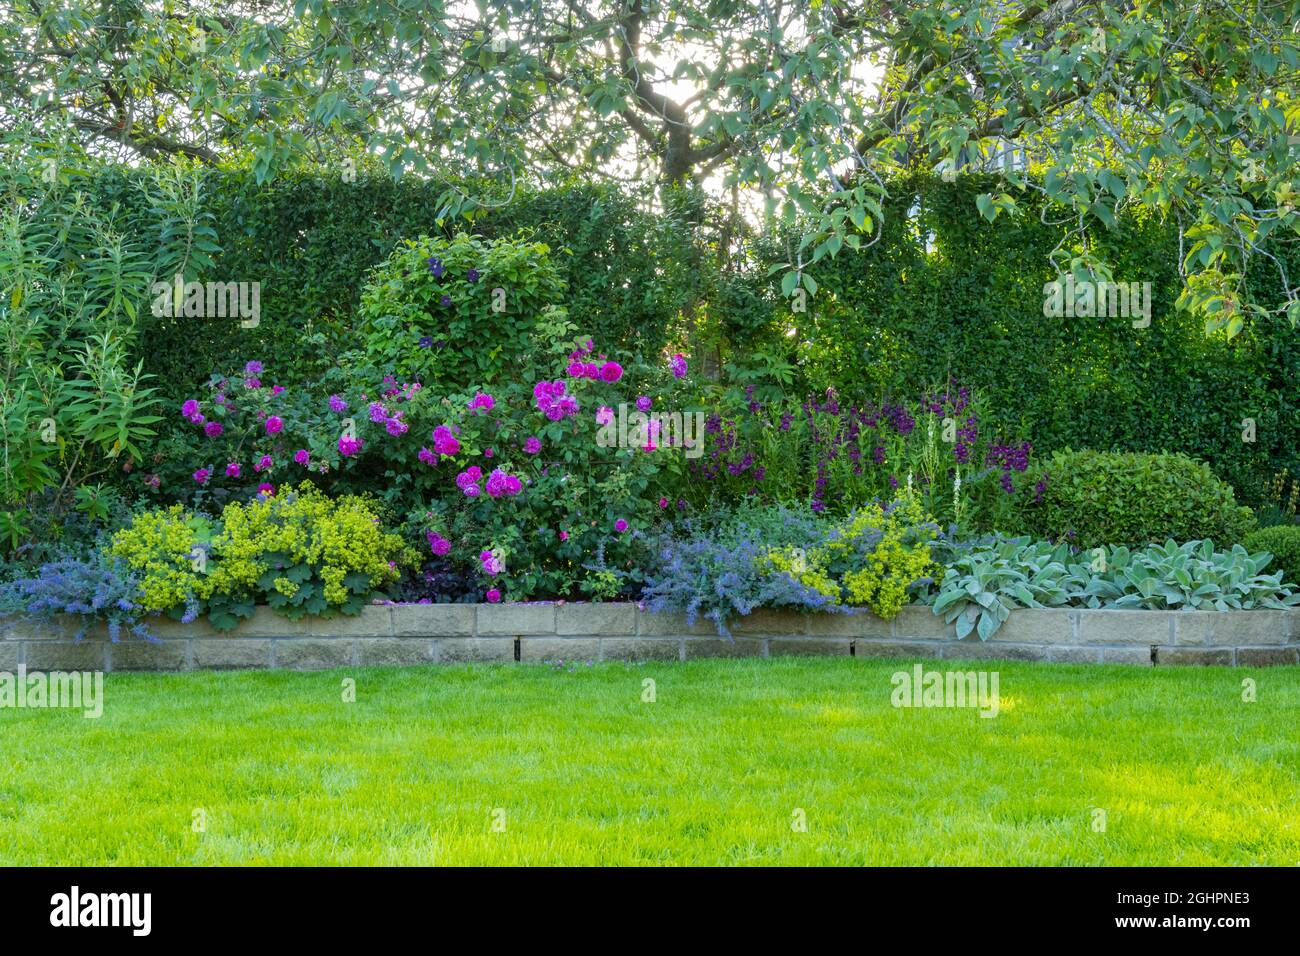 Landscaped sunny private garden (contemporary design, colourful summer flowers, pink roses, catmint, neat lawn, low stone wall) - Yorkshire England UK Stock Photo